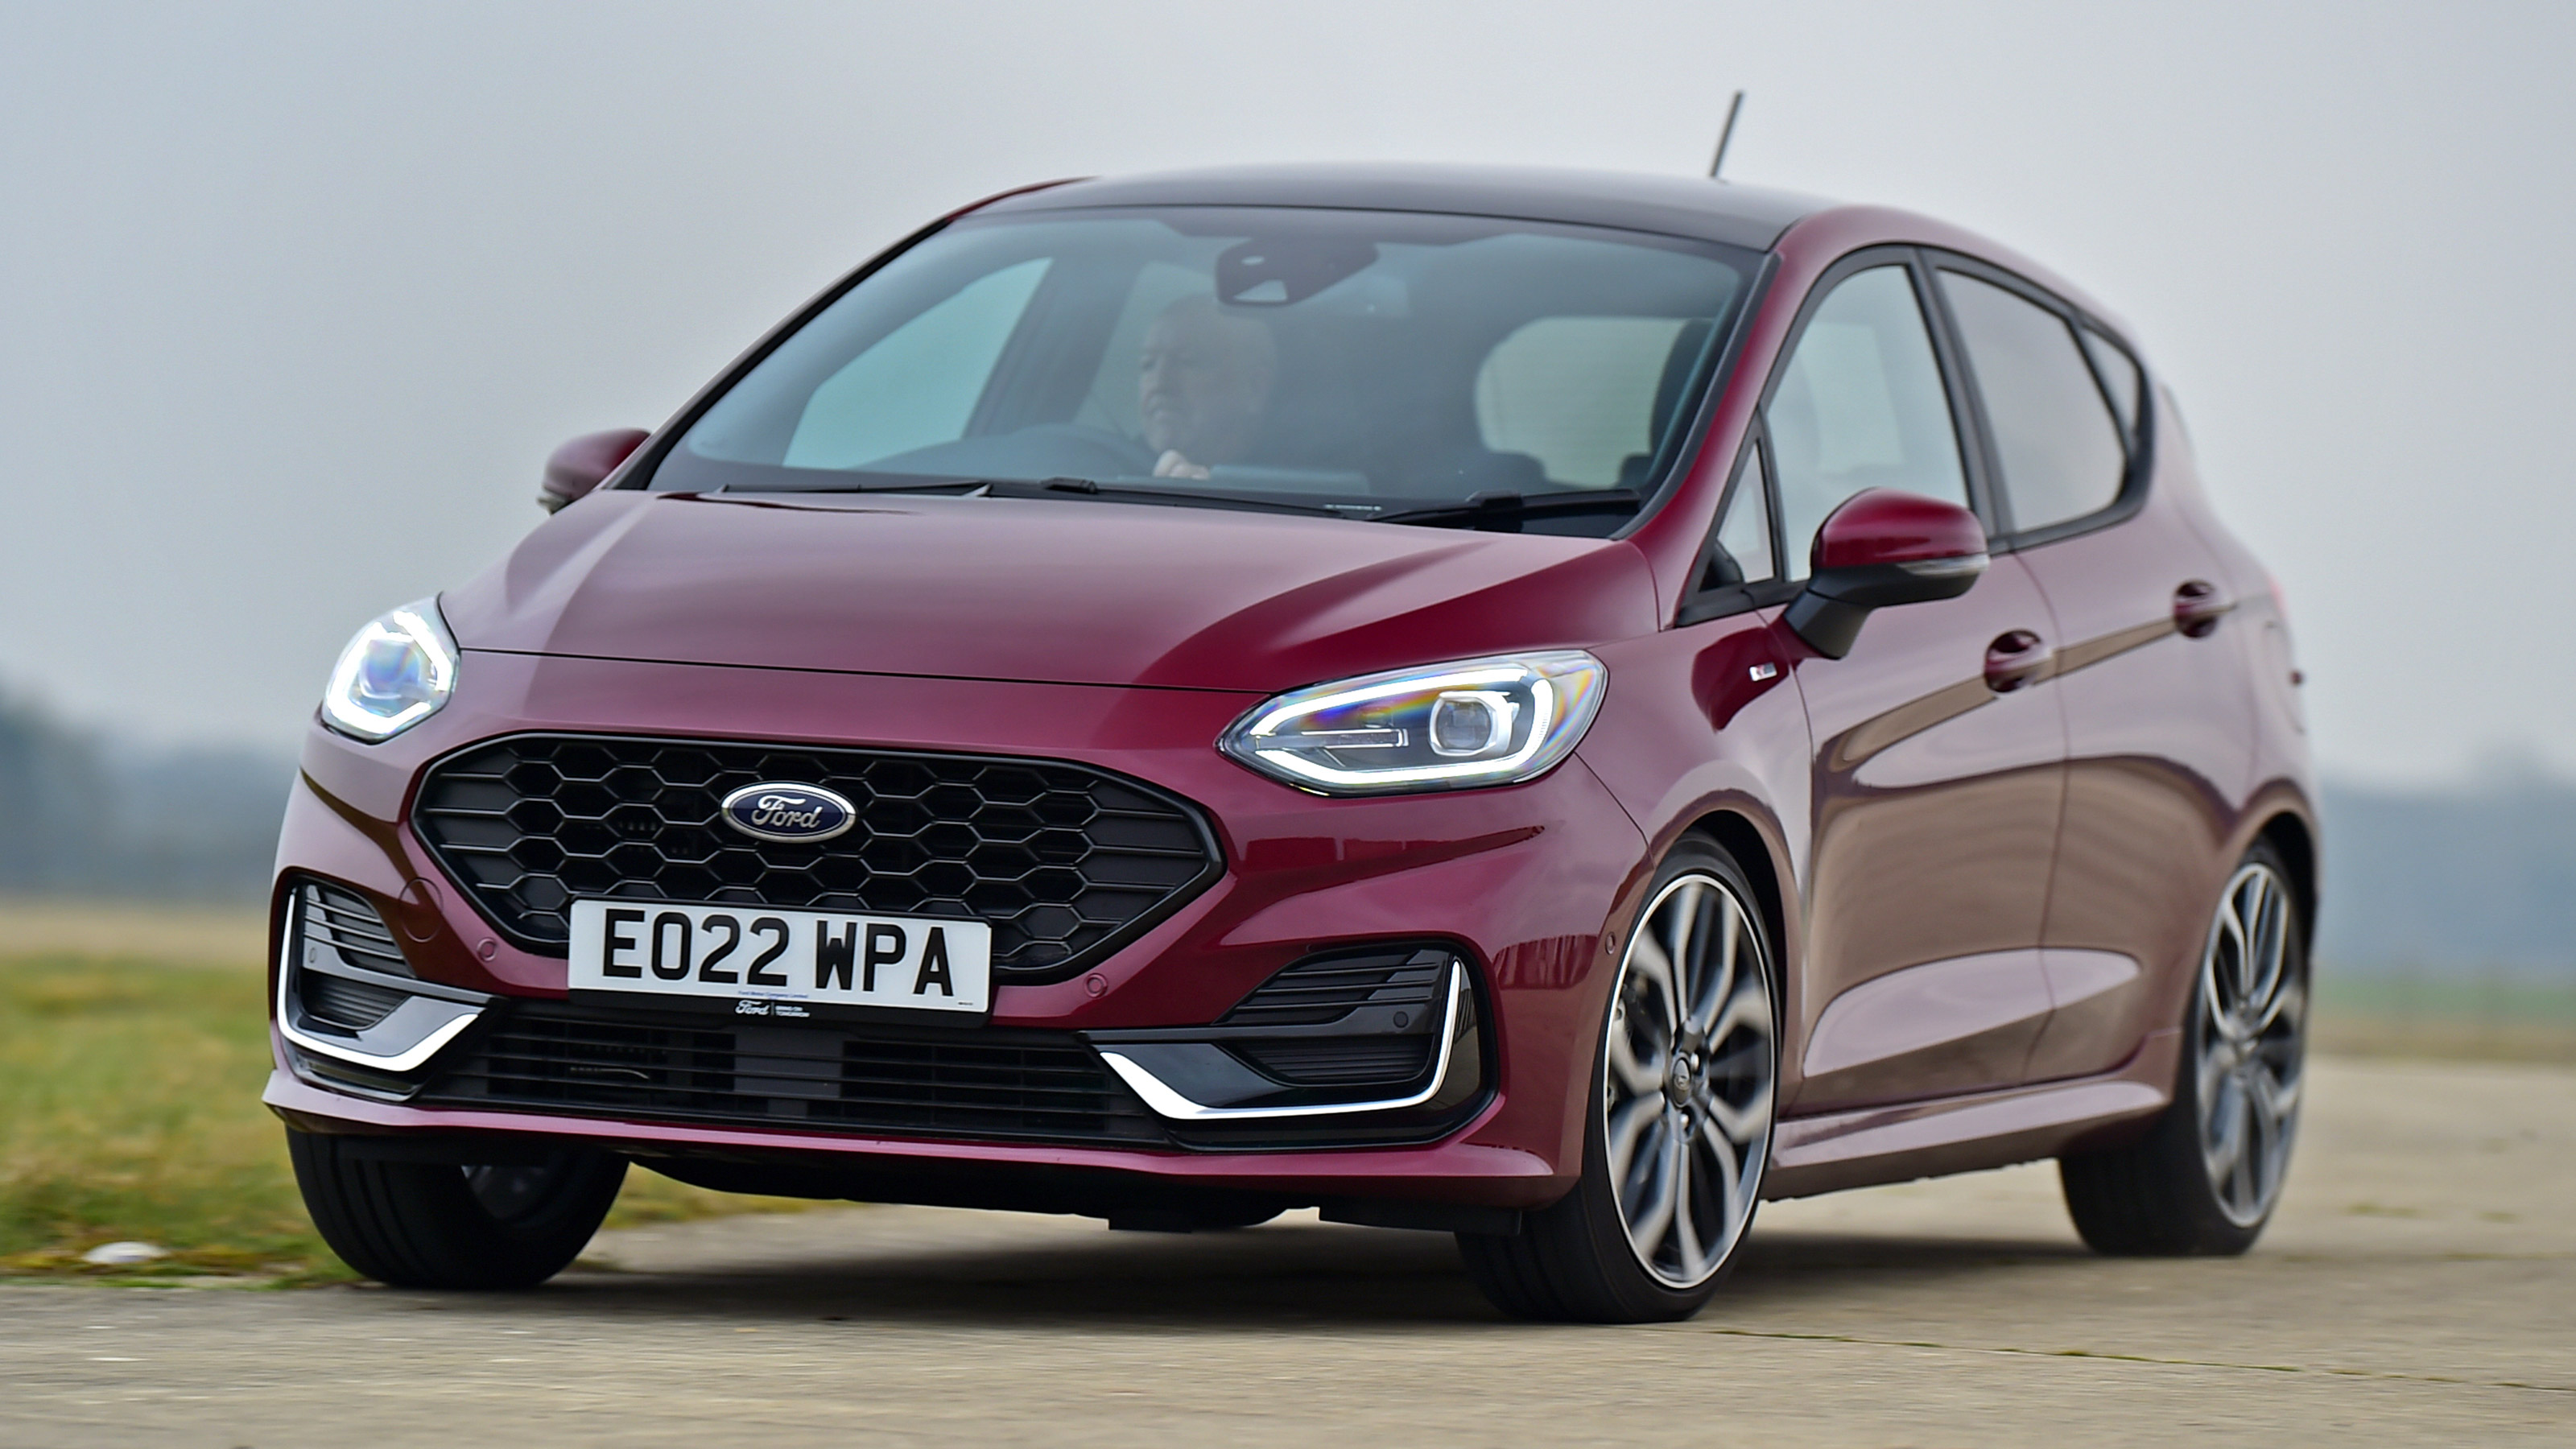 Ford Fiesta axed as brand focuses on new electric cars